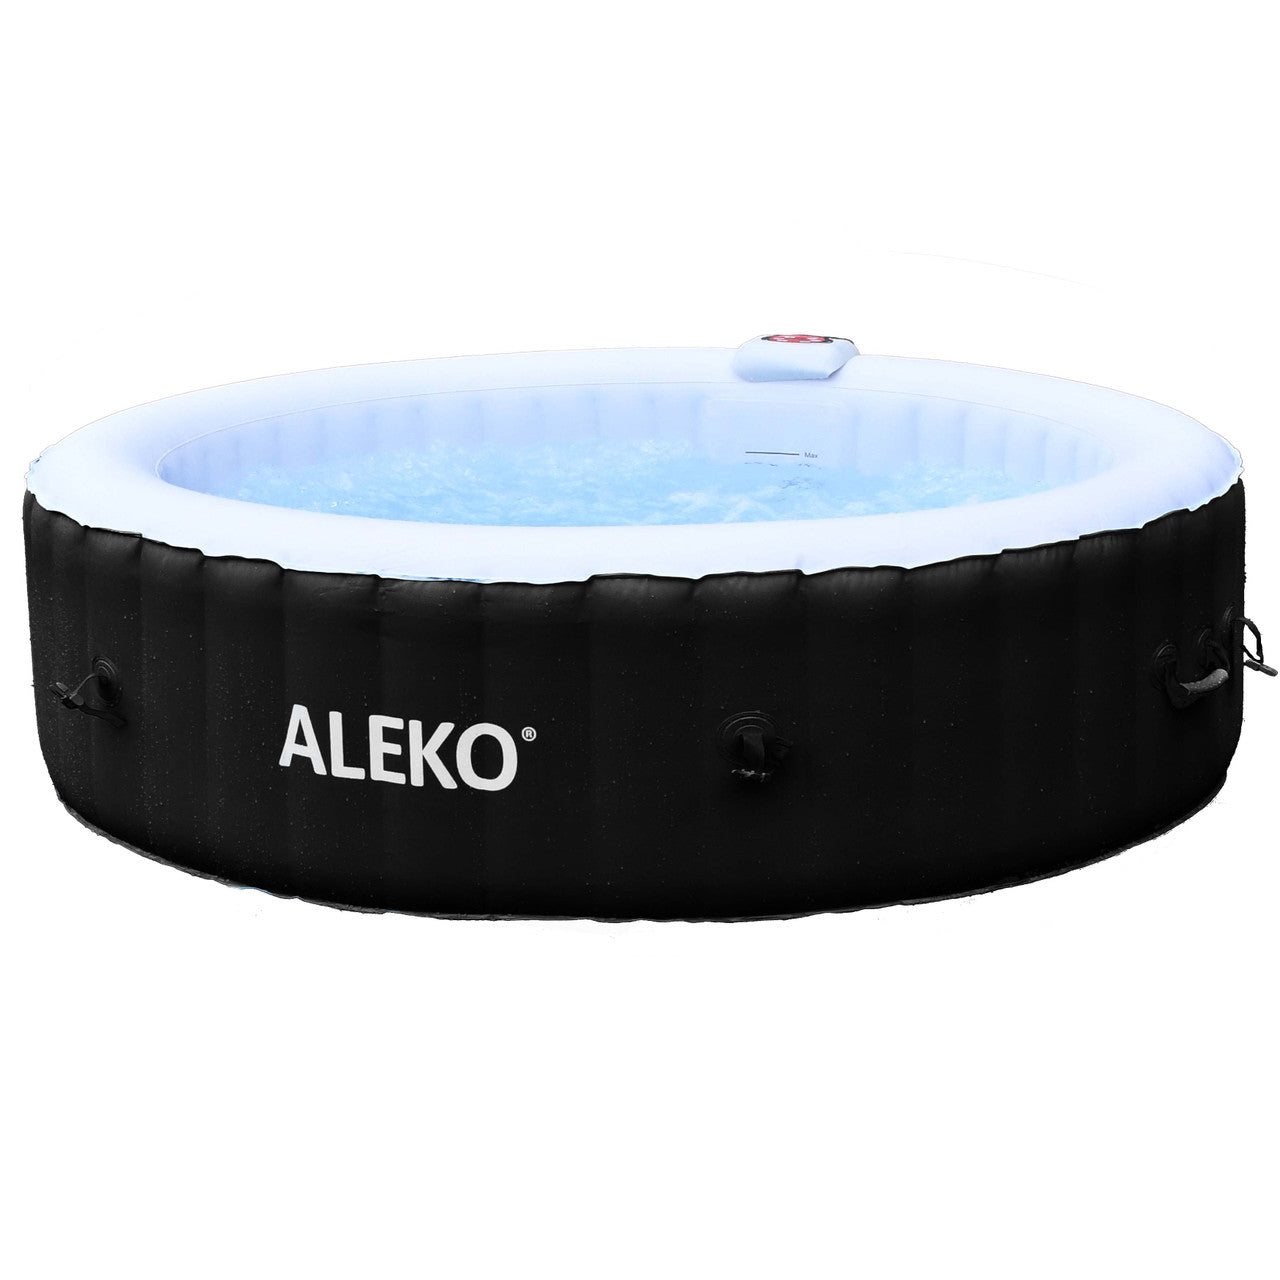 Aleko Round Inflatable Jetted Hot Tub with Cover - 6 Person - 265 Gallon - Black and White  HTIR6BKW-AP - Serenity Provision